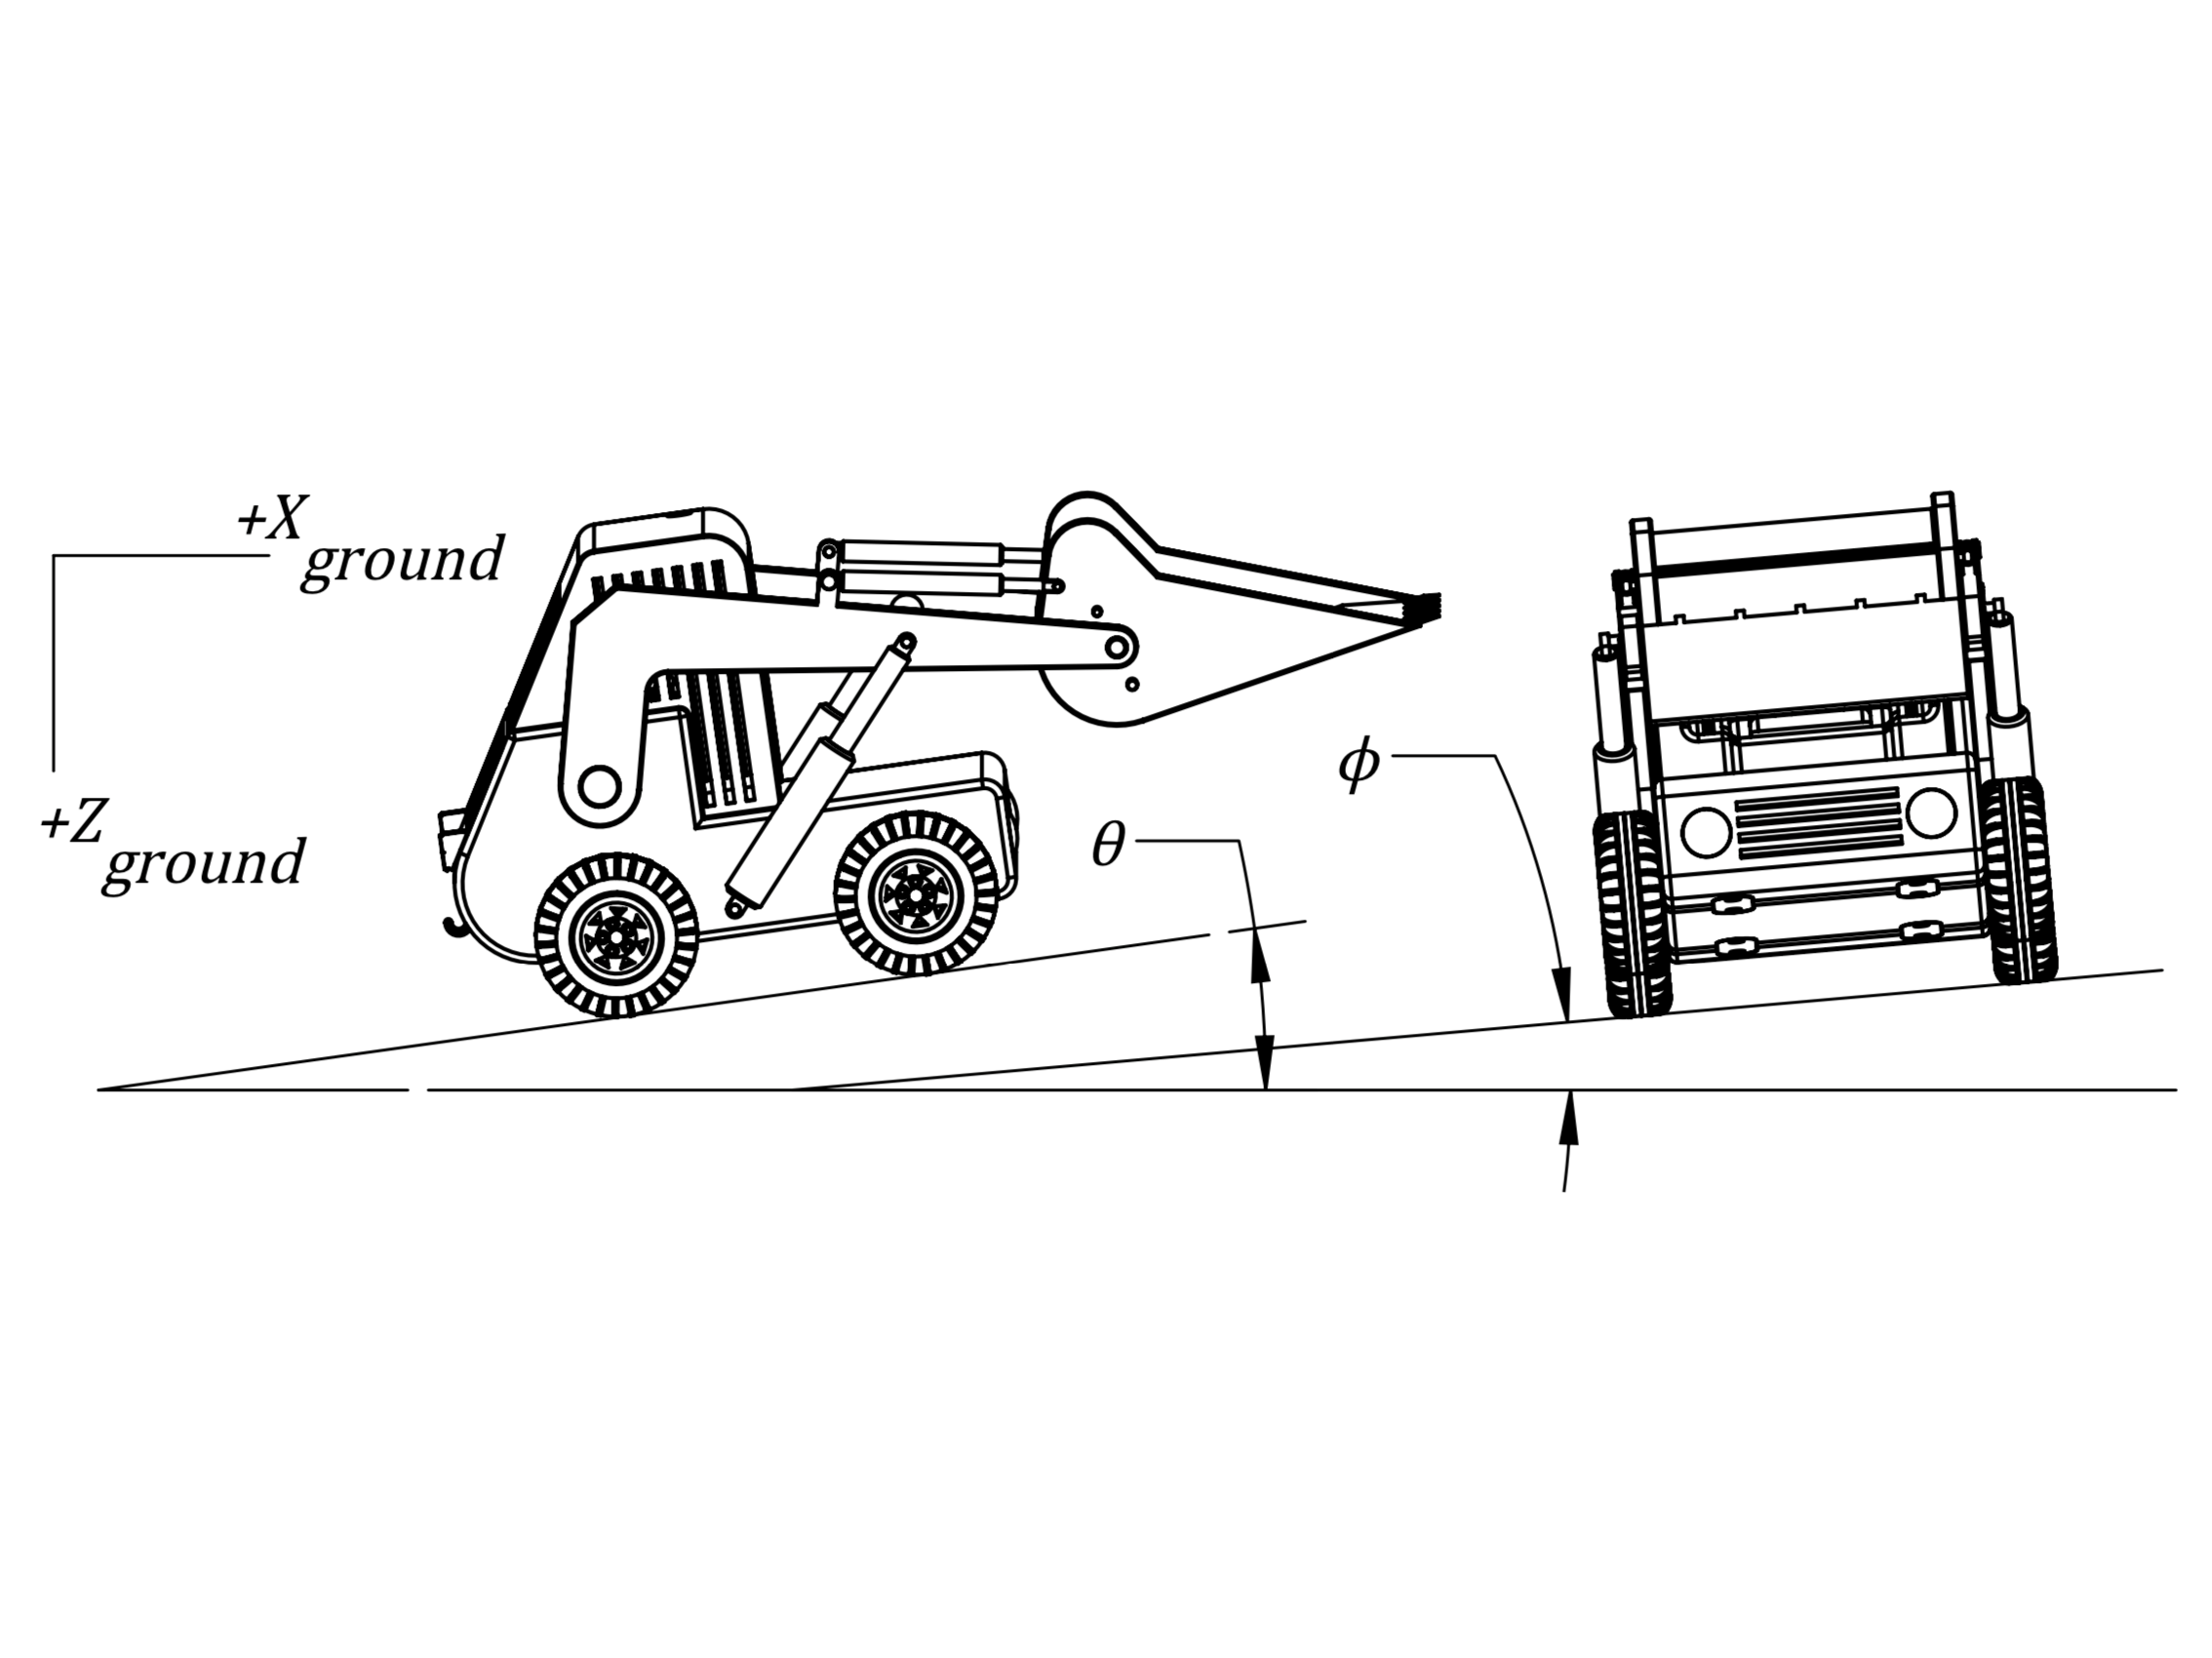 End-effector Position Estimation on Off-Road Vehicles